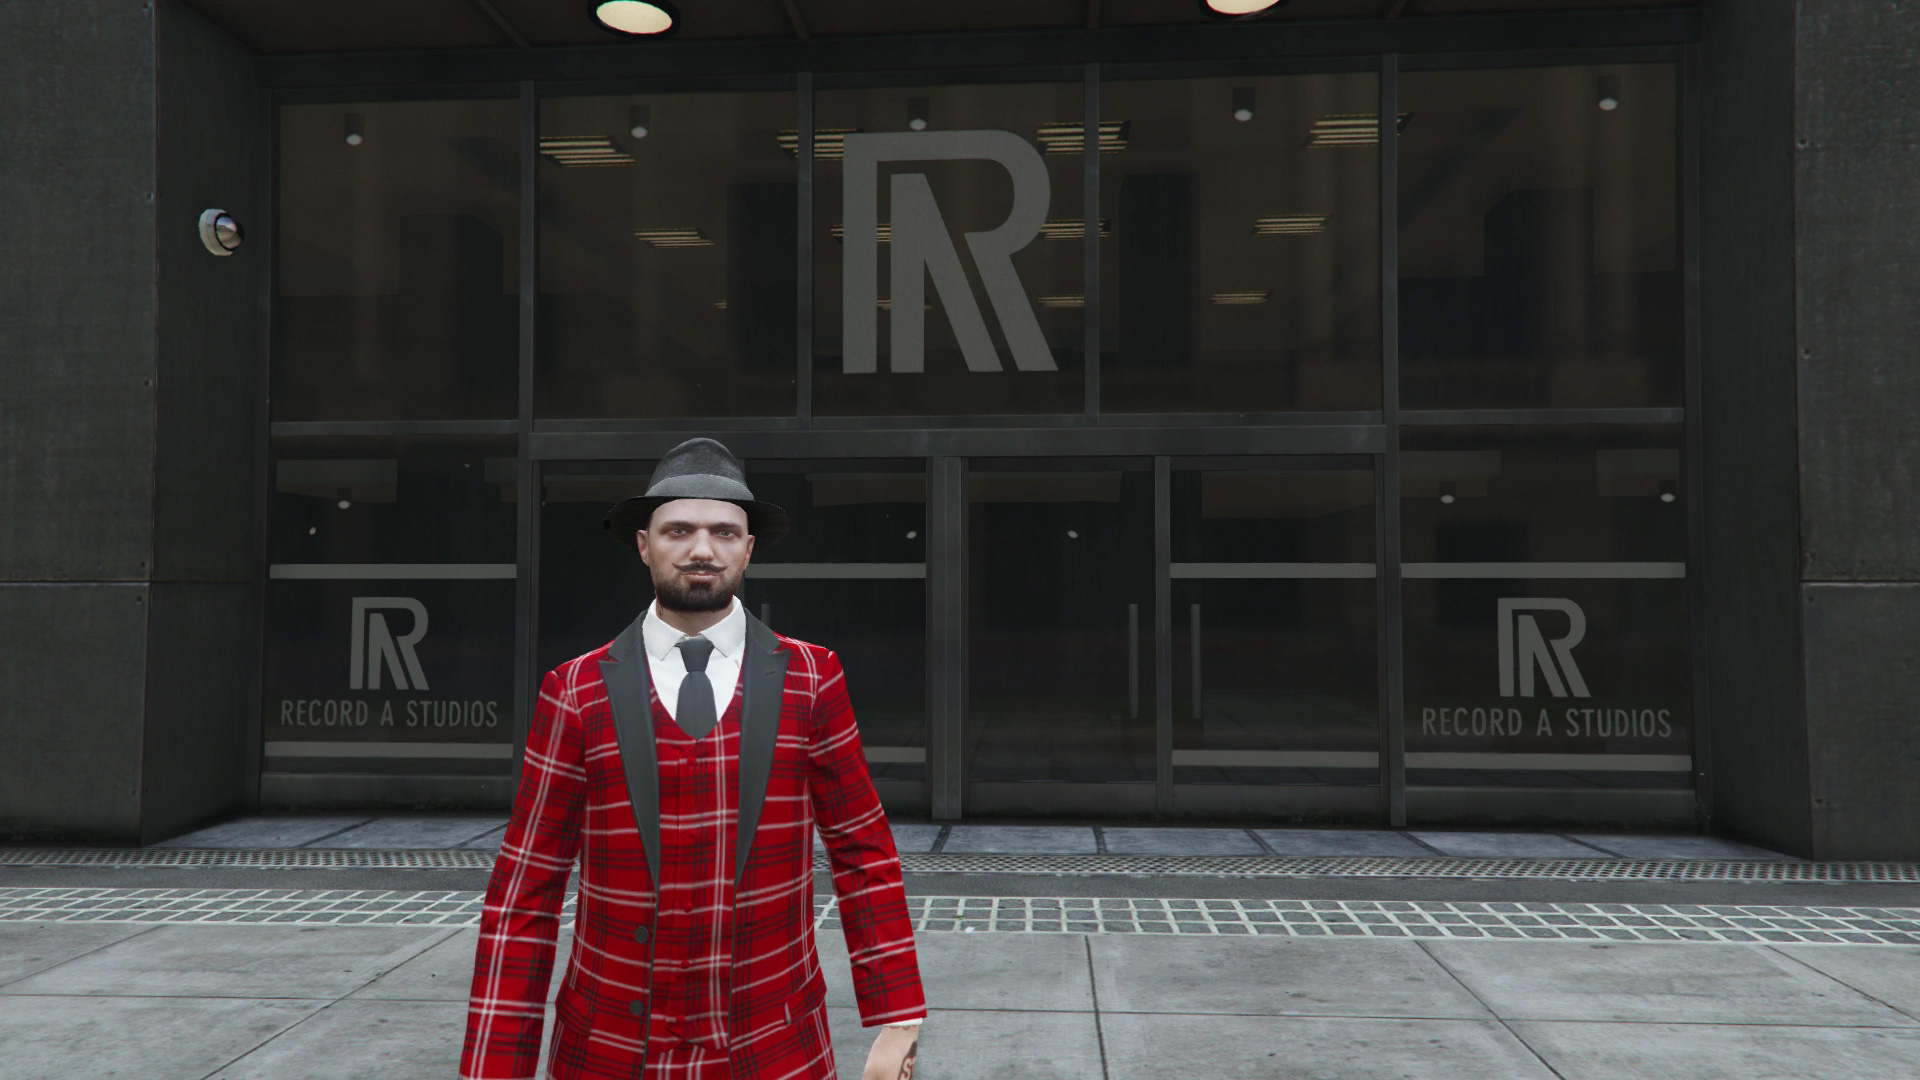 GTA Online Record A Studios location and how to access it